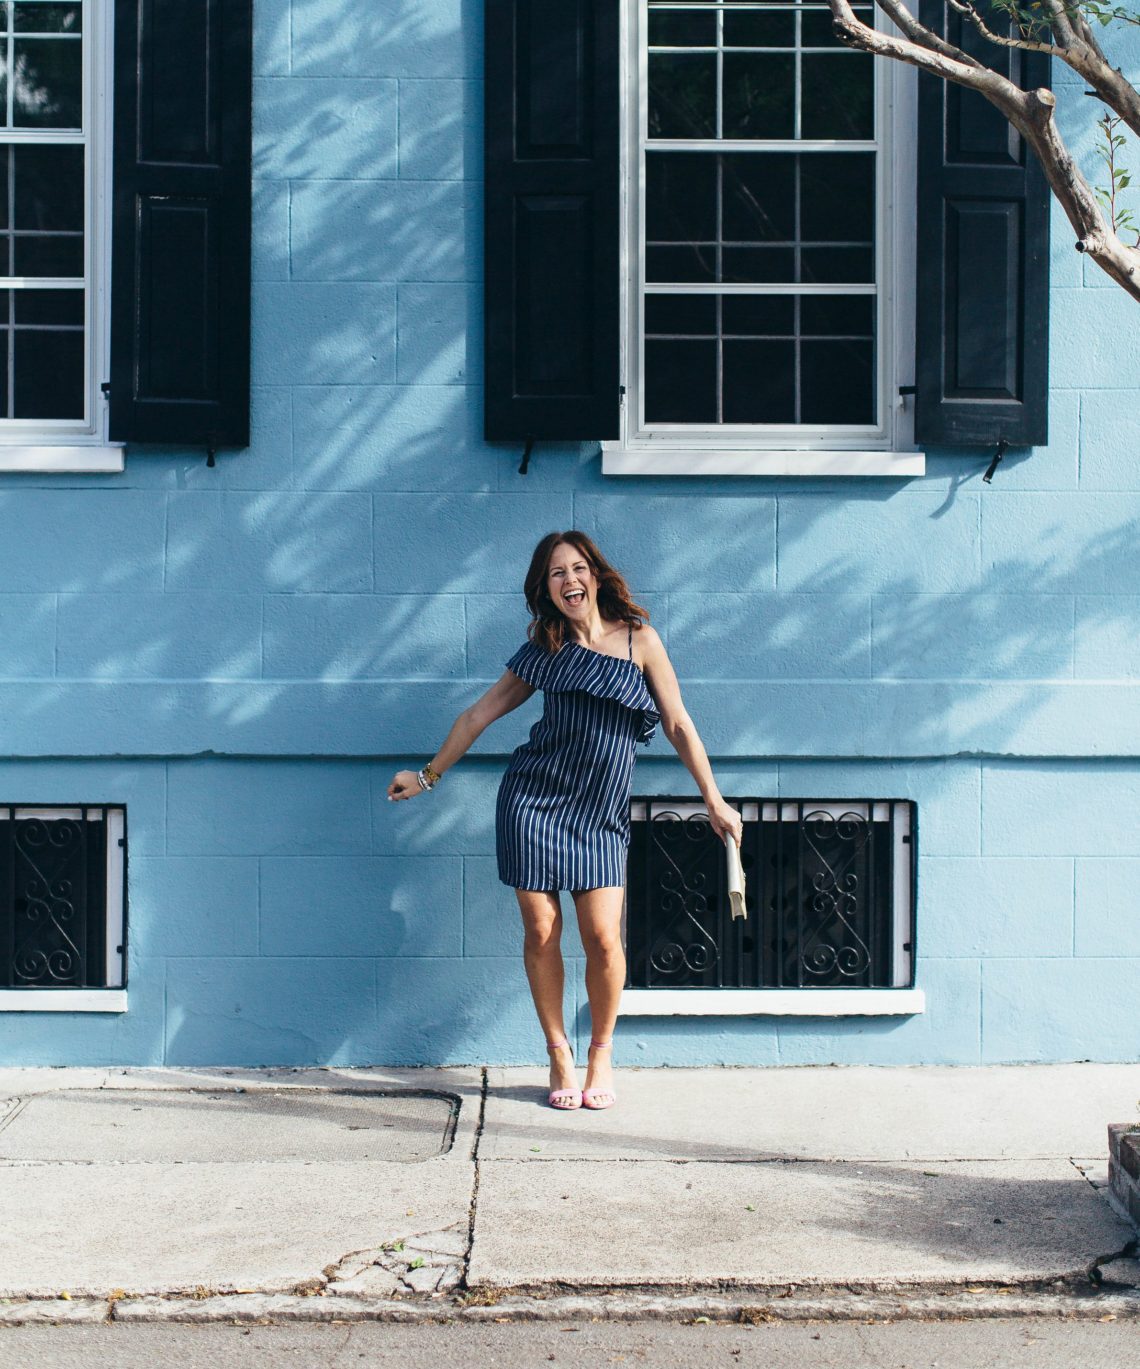 28 Ways You Can Add More Joy in your life - Wellness Wednesday Series by popular Florida lifestyle blogger The Modern Savvy